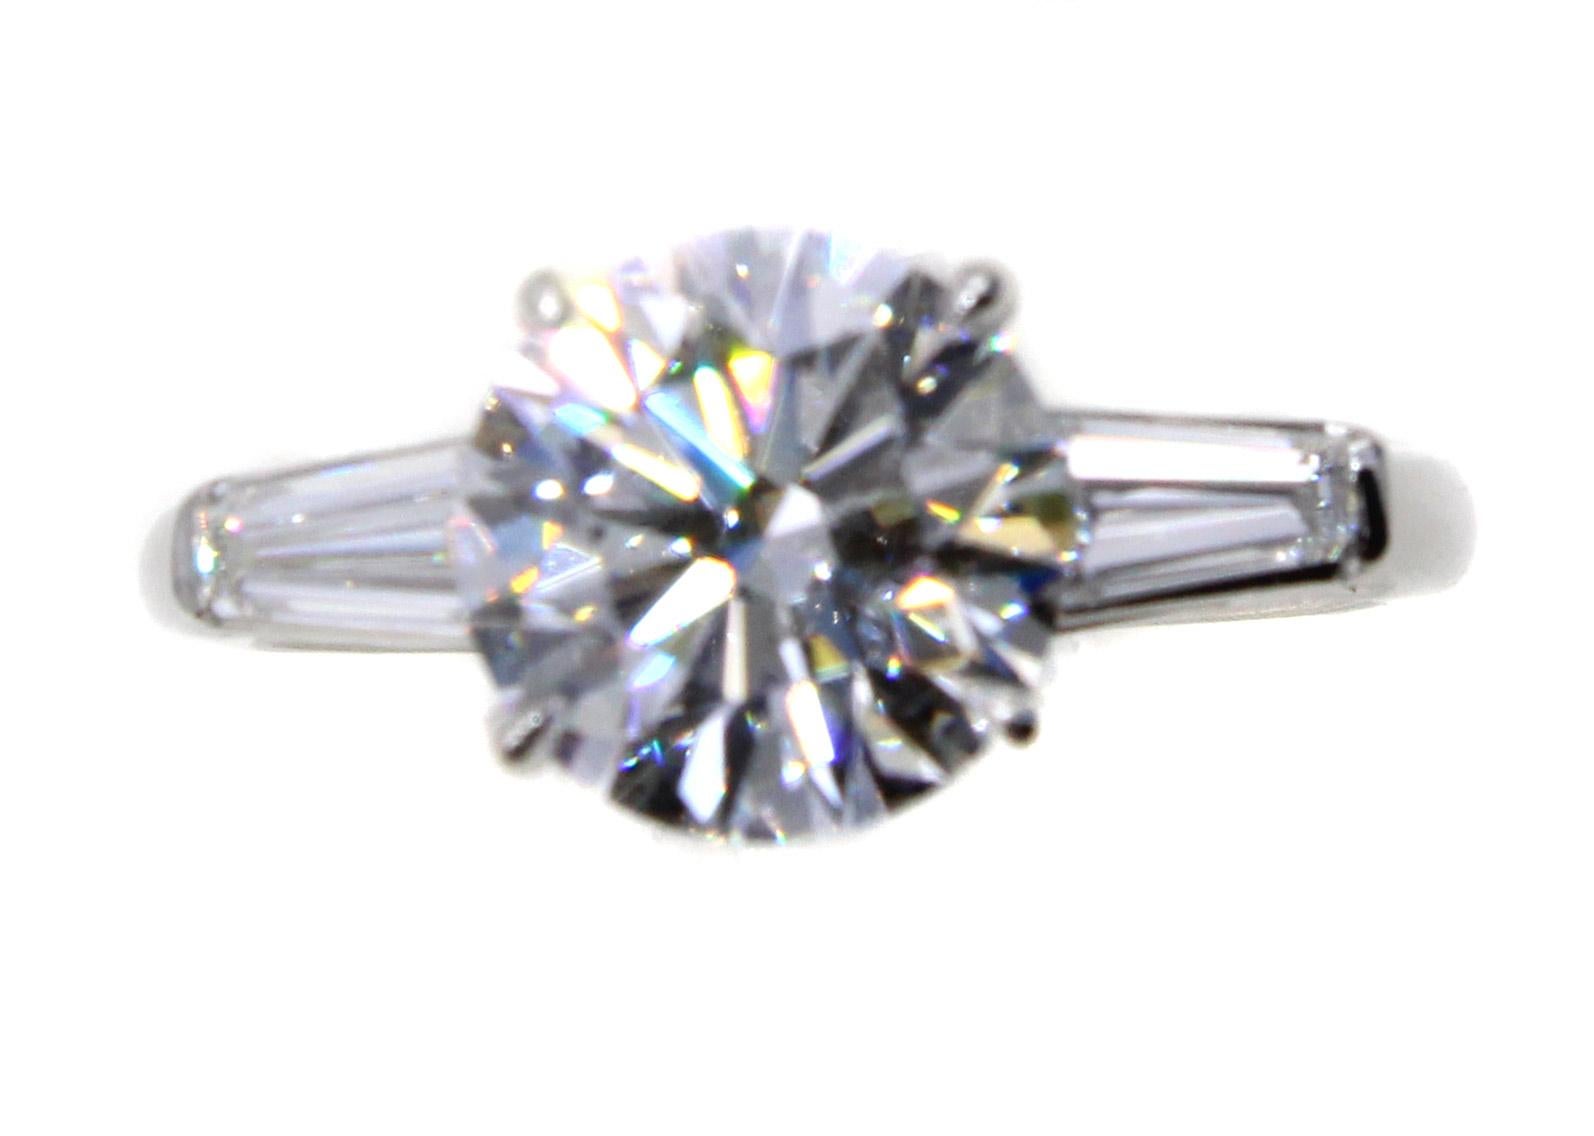 The perfect diamond, a round brilliant cut weighing 2.56 carats with the highest color and clarity grade of D and IF ( internally flawless) is set in a classic handmade platinum ring with 2 tapered baguettes on the top of the shanks. With the cut,